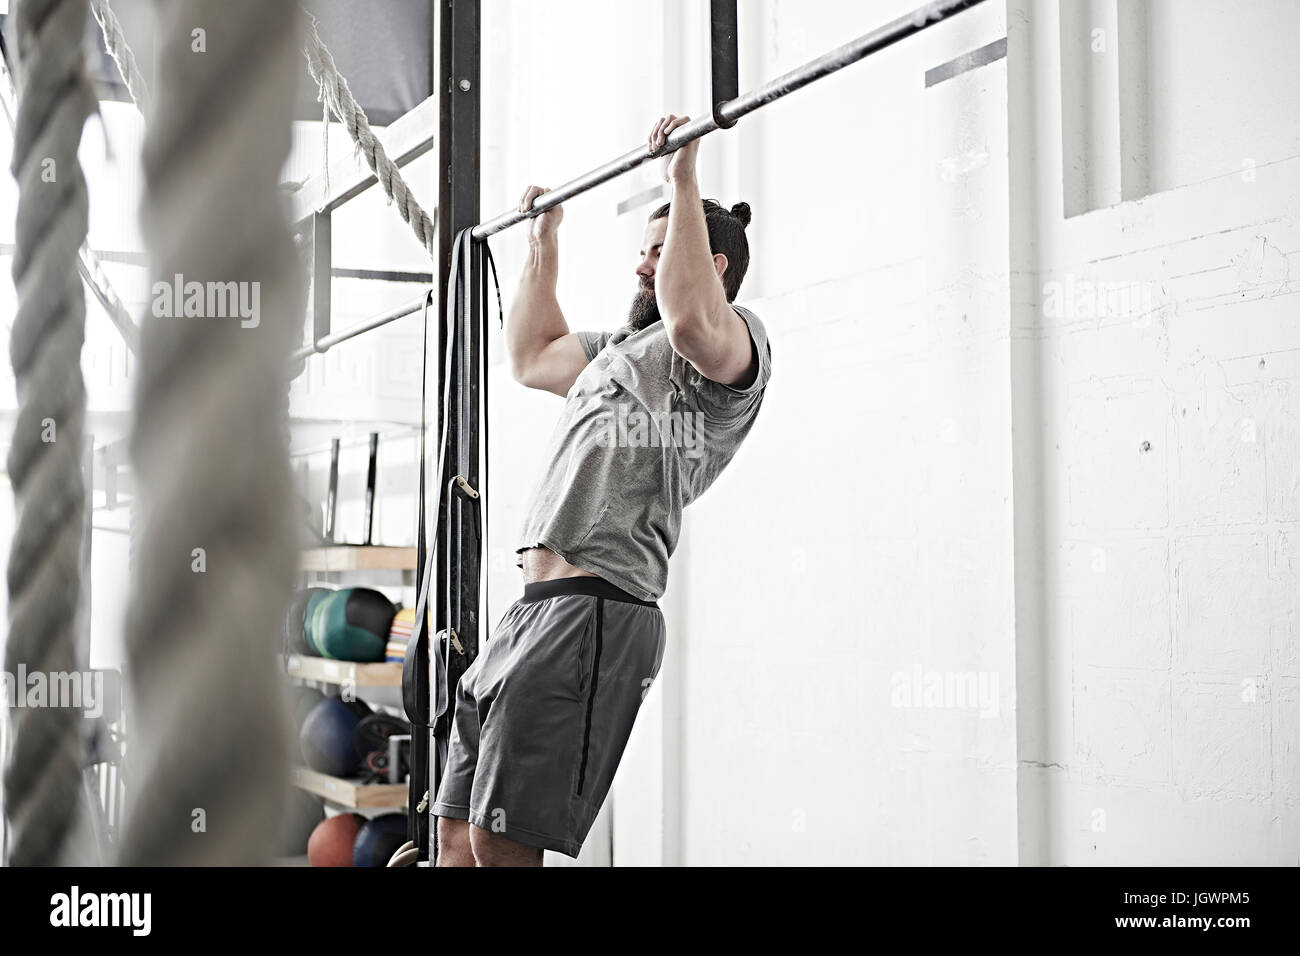 Man doing chin-up in cross training gym Stock Photo